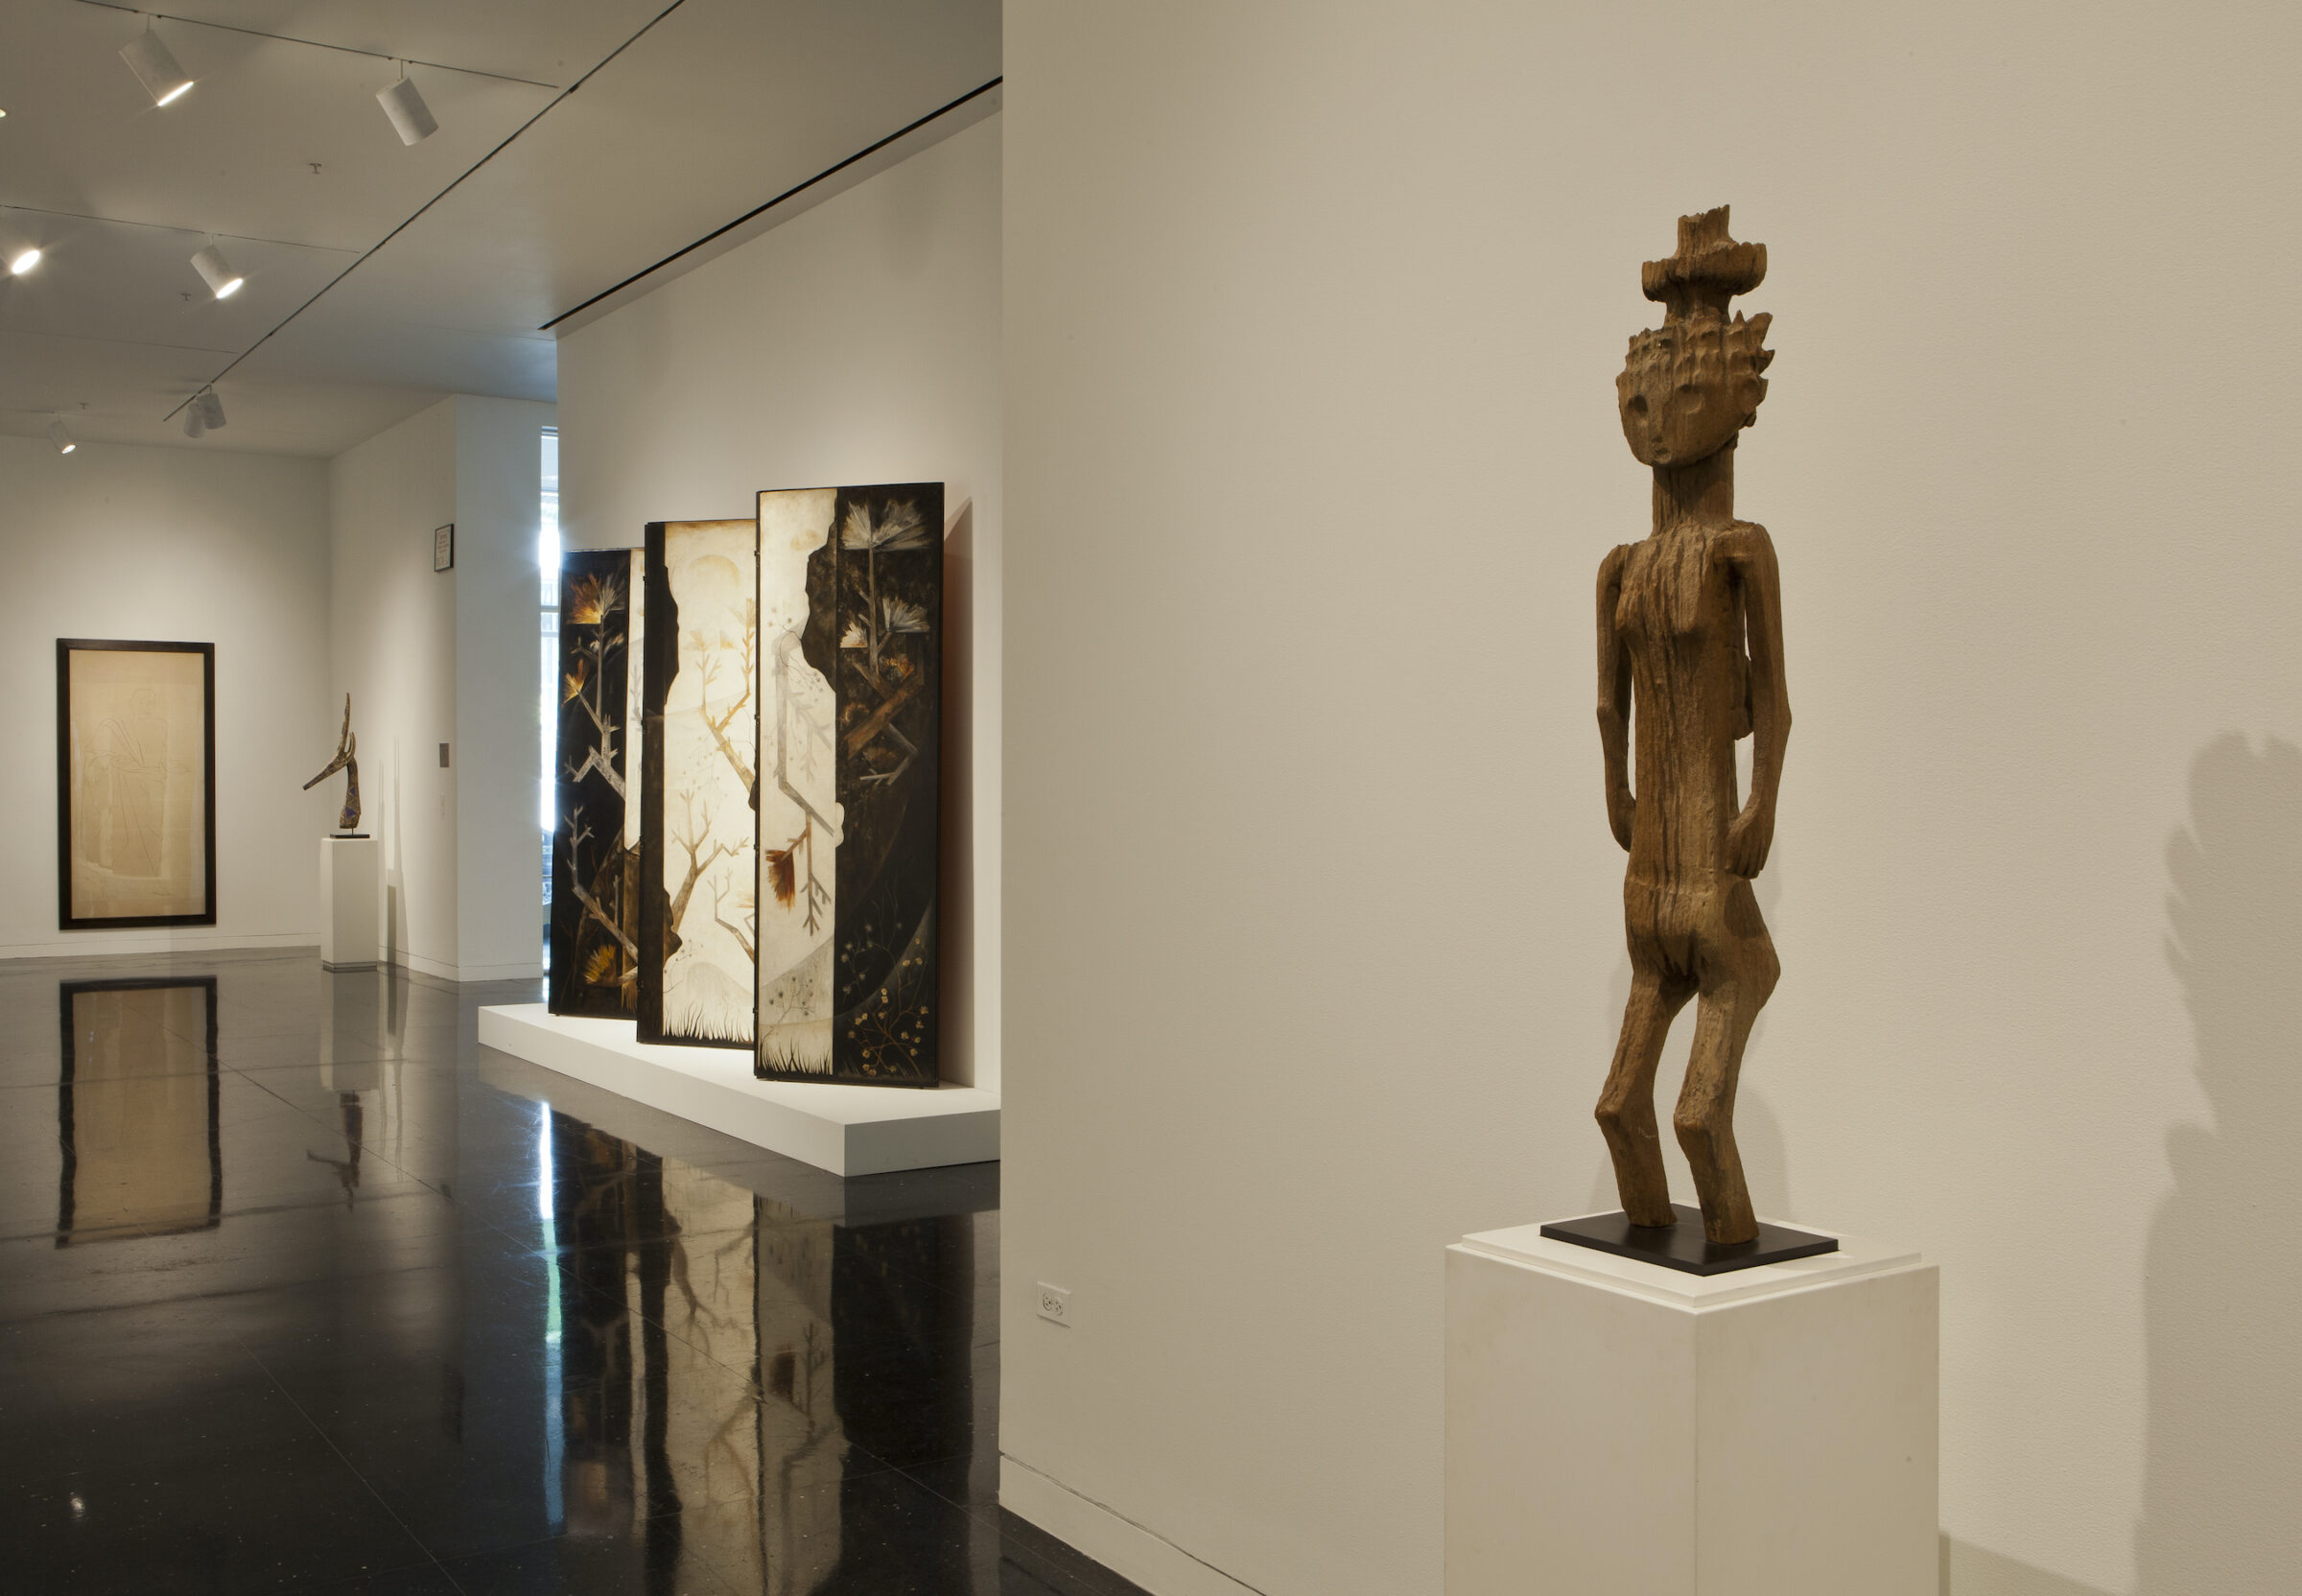 A soft lit gallery featuring a wooden carved sculpture of a female figure balancing an object on her head and standing on a square white pedestal.